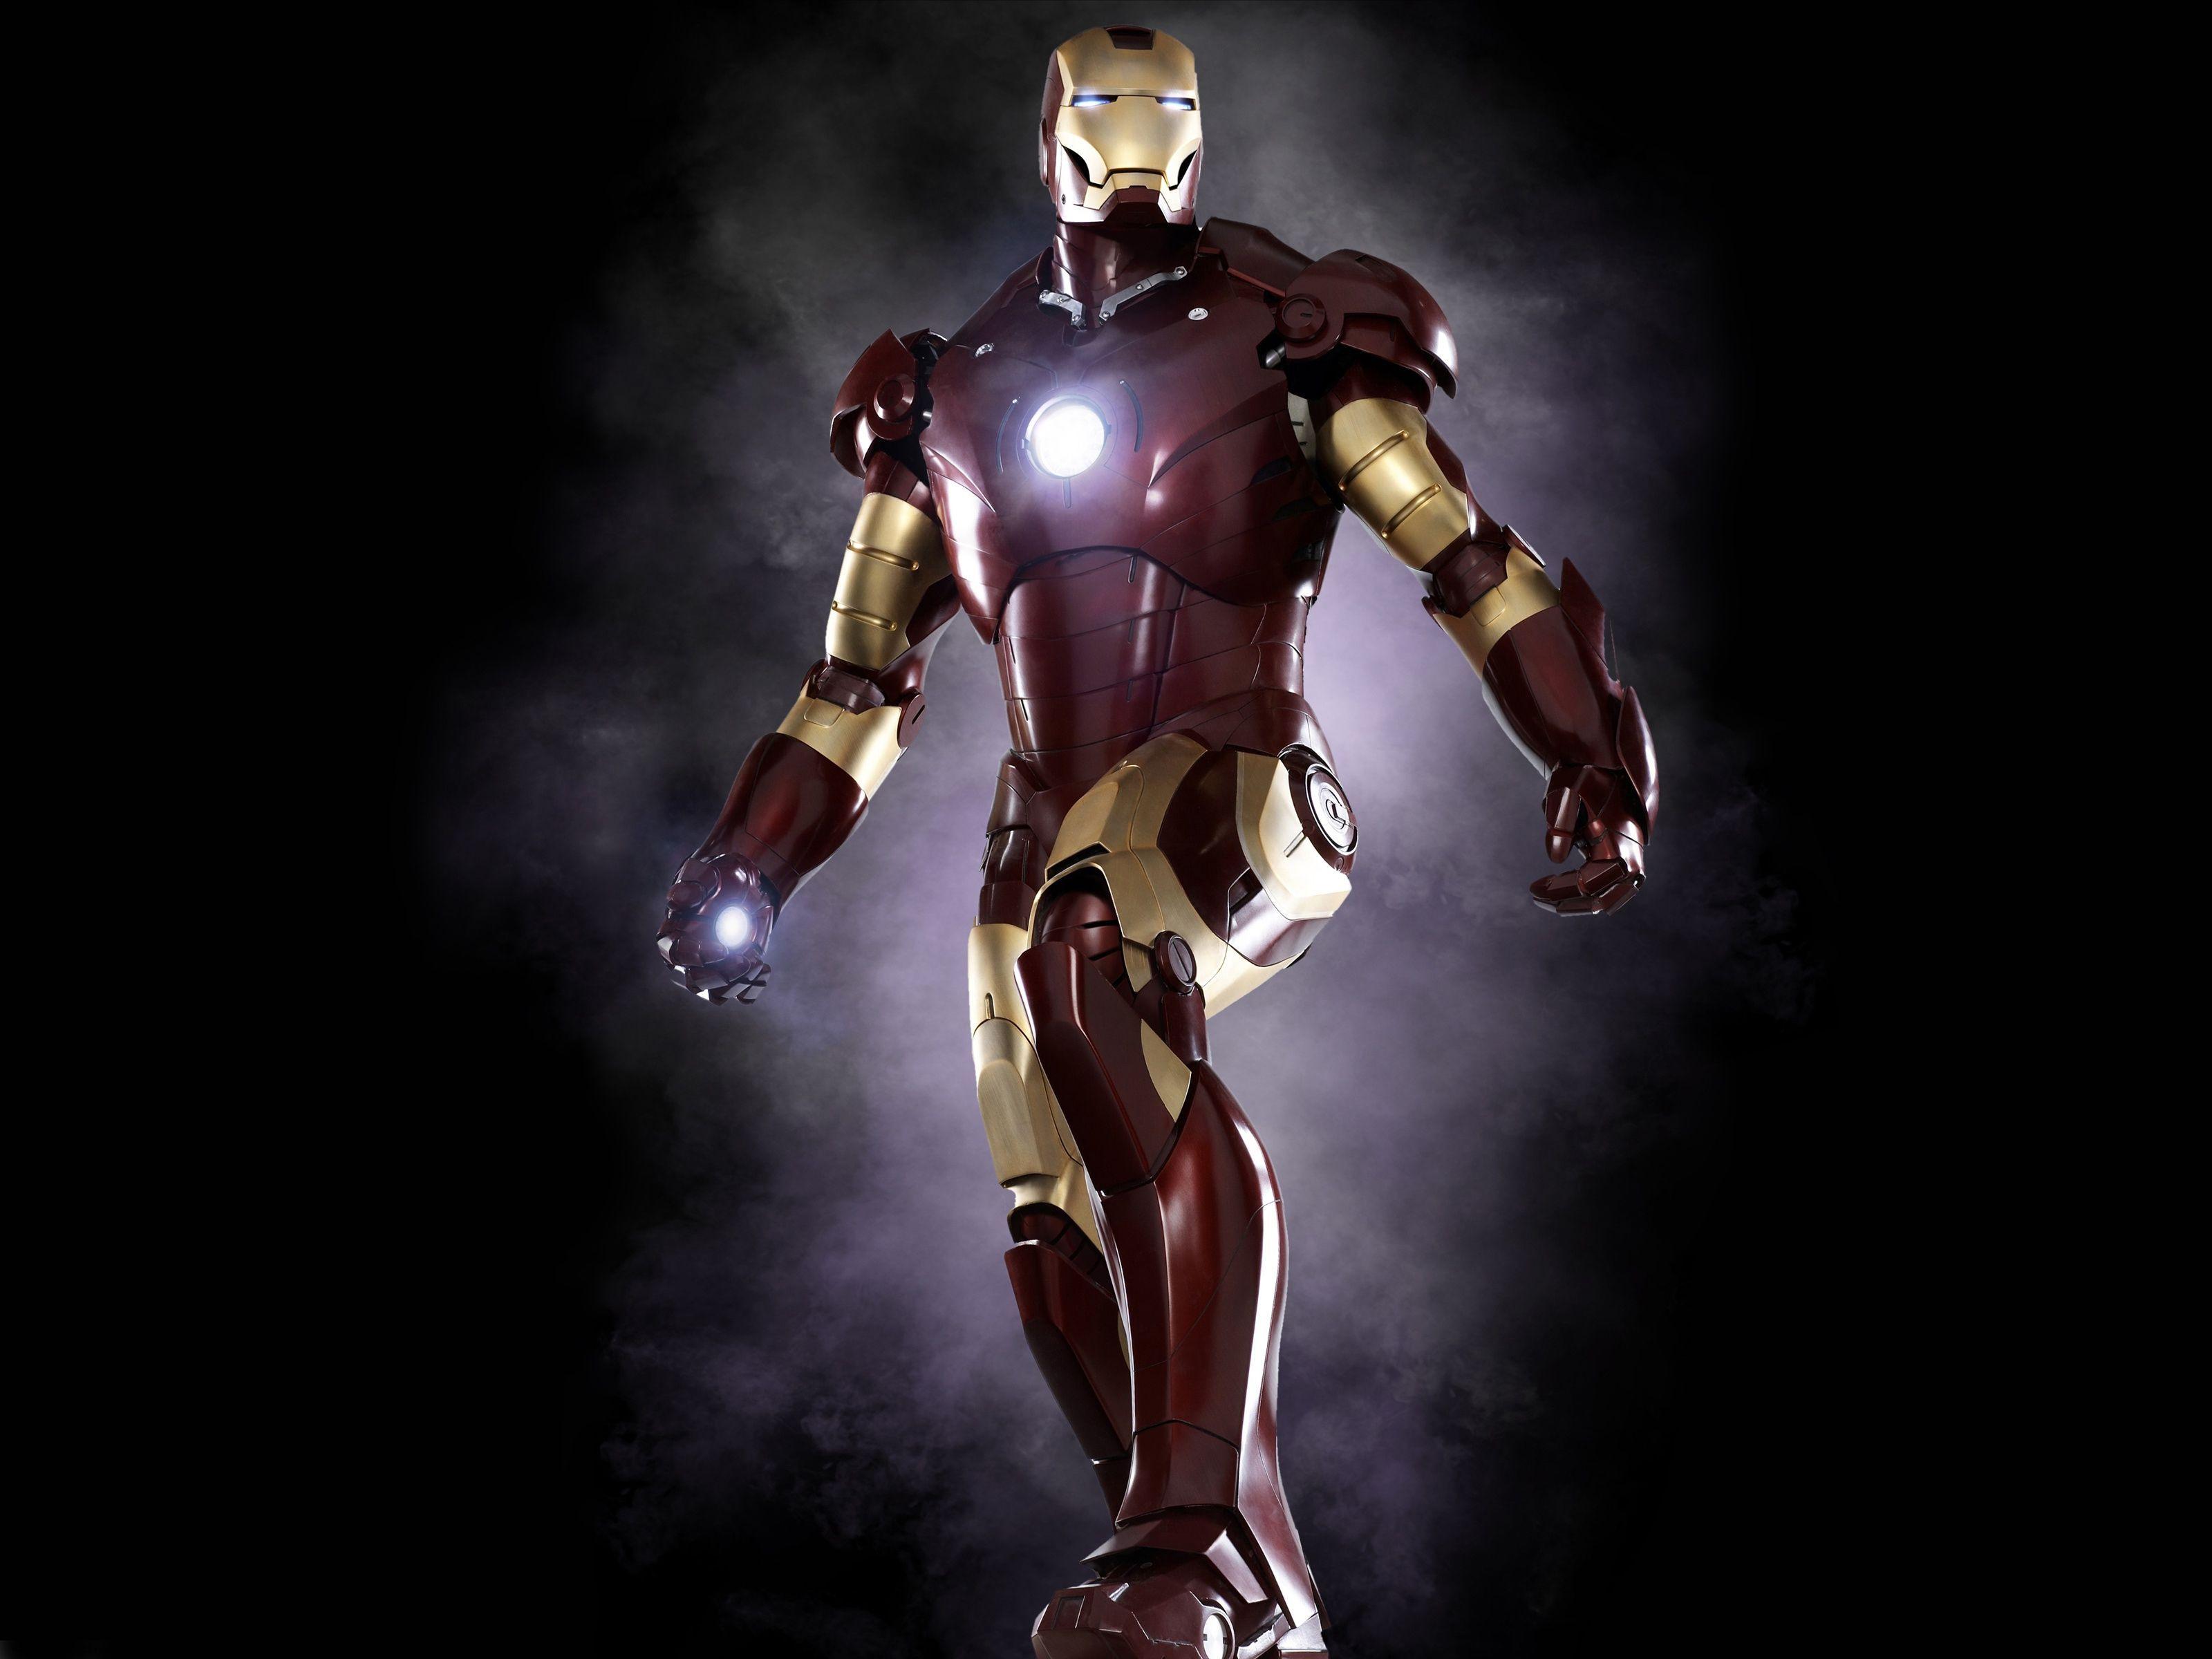 Iron Man H D Wallpaper Collection For Free Download. HD Wallpaper